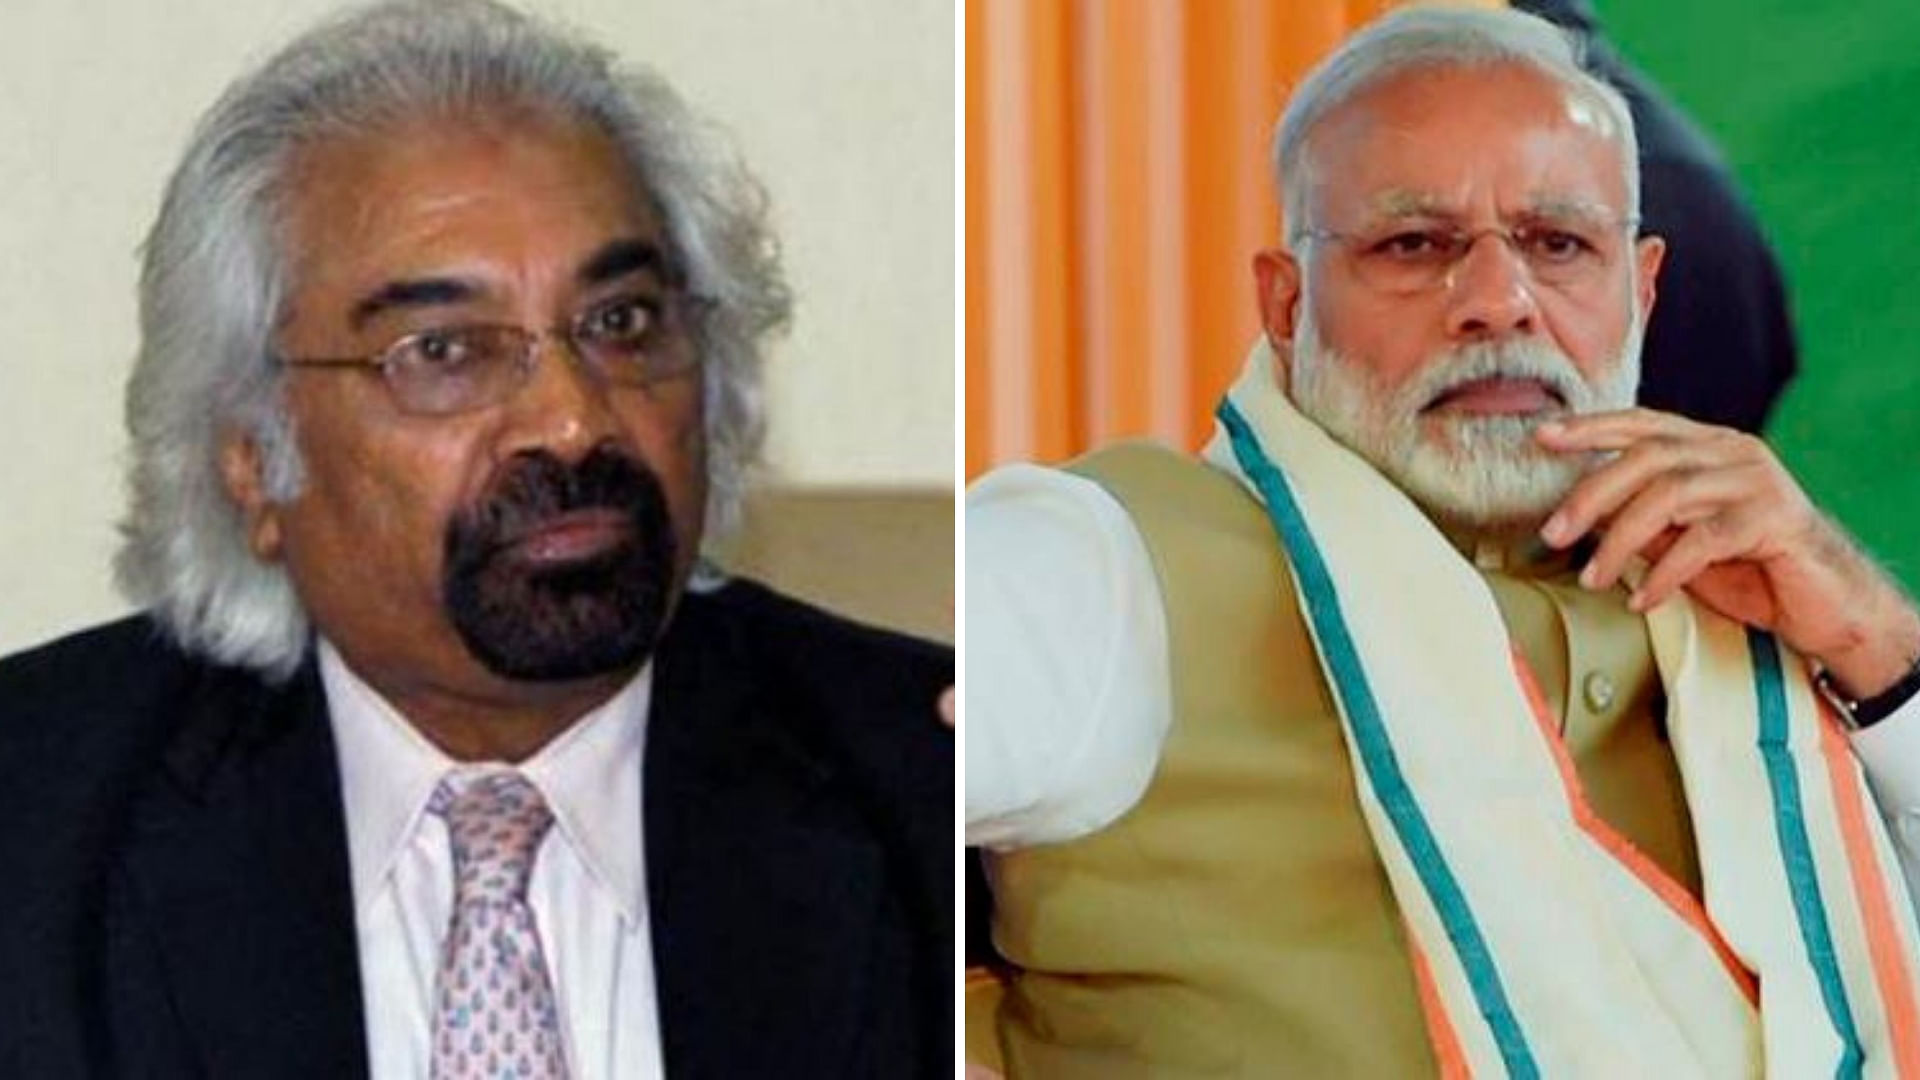 Pitroda said that the Congress-led UPA could have “sent planes” after the 26/11 Mumbai attacks but that it was “not right approach.”